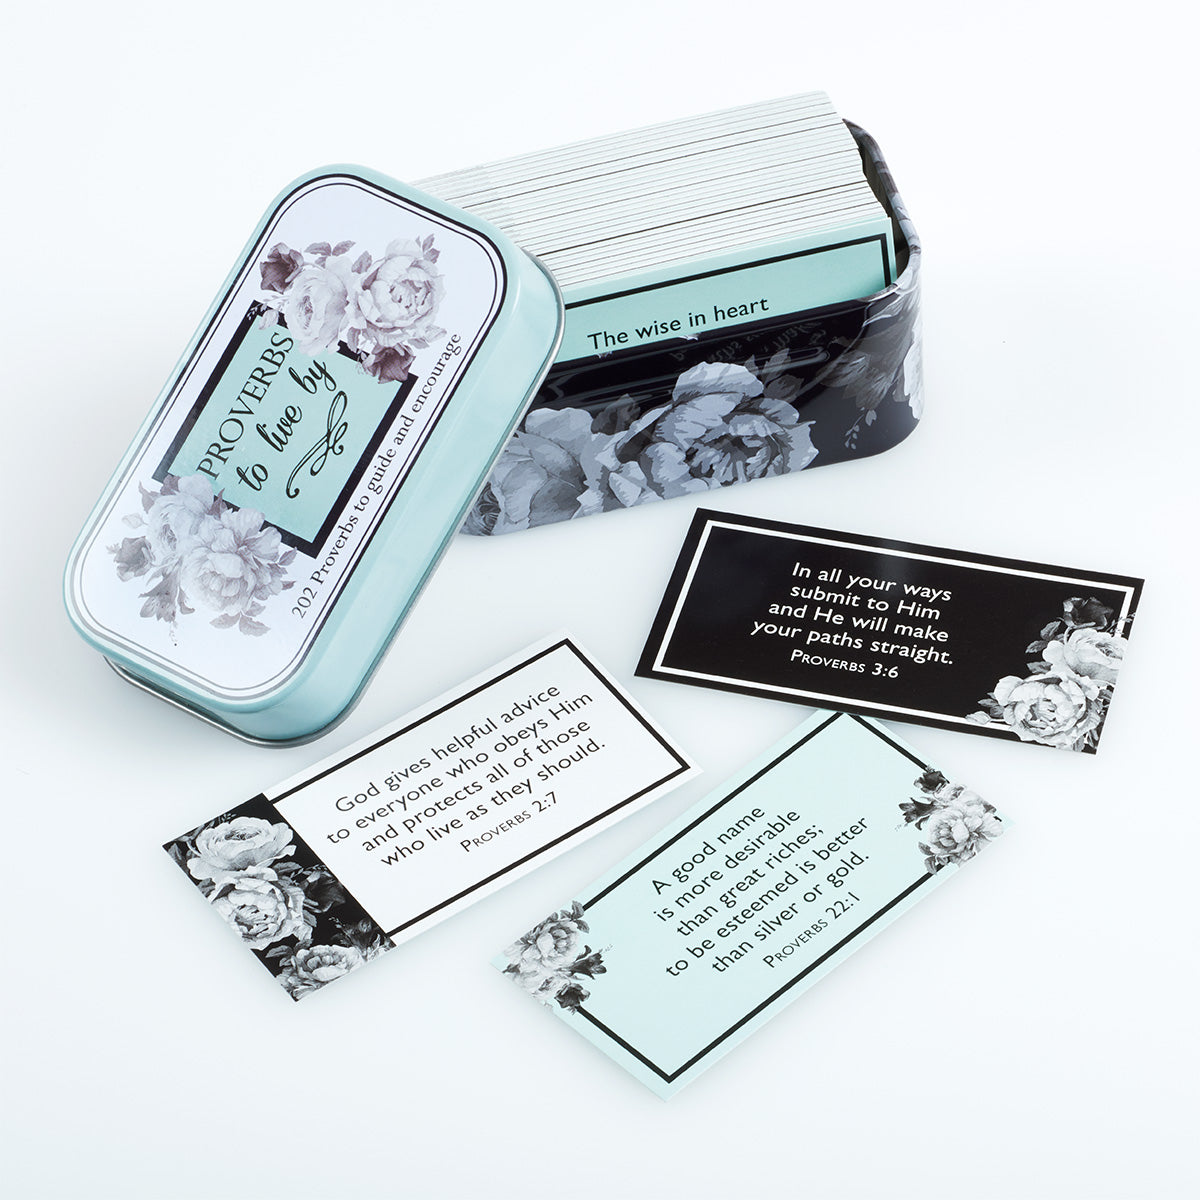 Proverbs to Live By Scripture Promise Cards in a Gift Tin - The Christian Gift Company